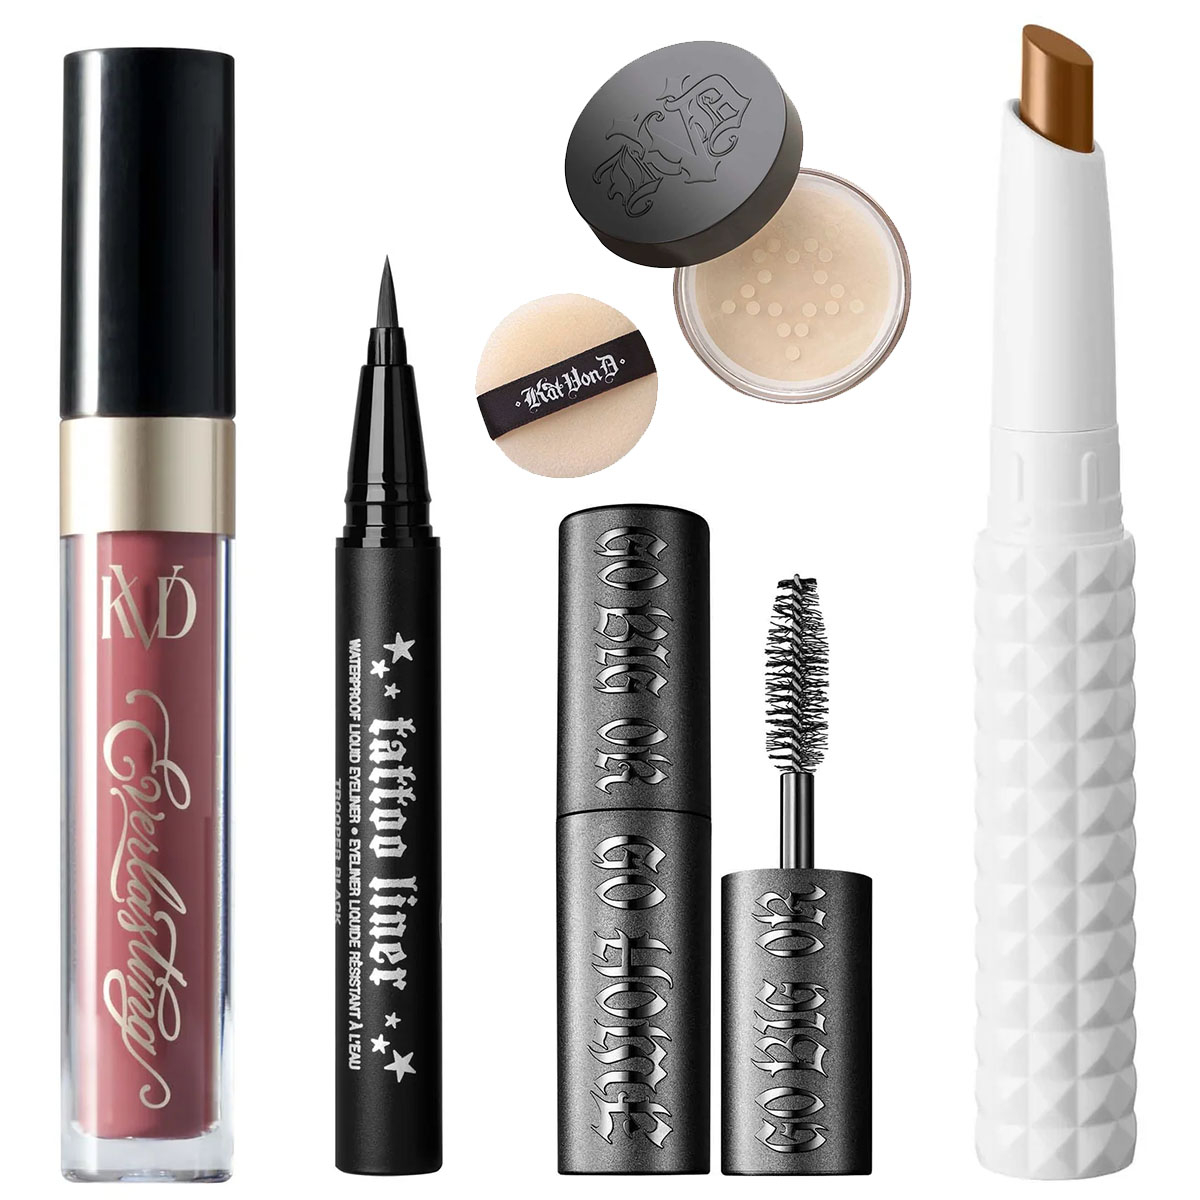 Here’s How You Can Get $80 Worth of KVD Beauty Makeup for Just $35